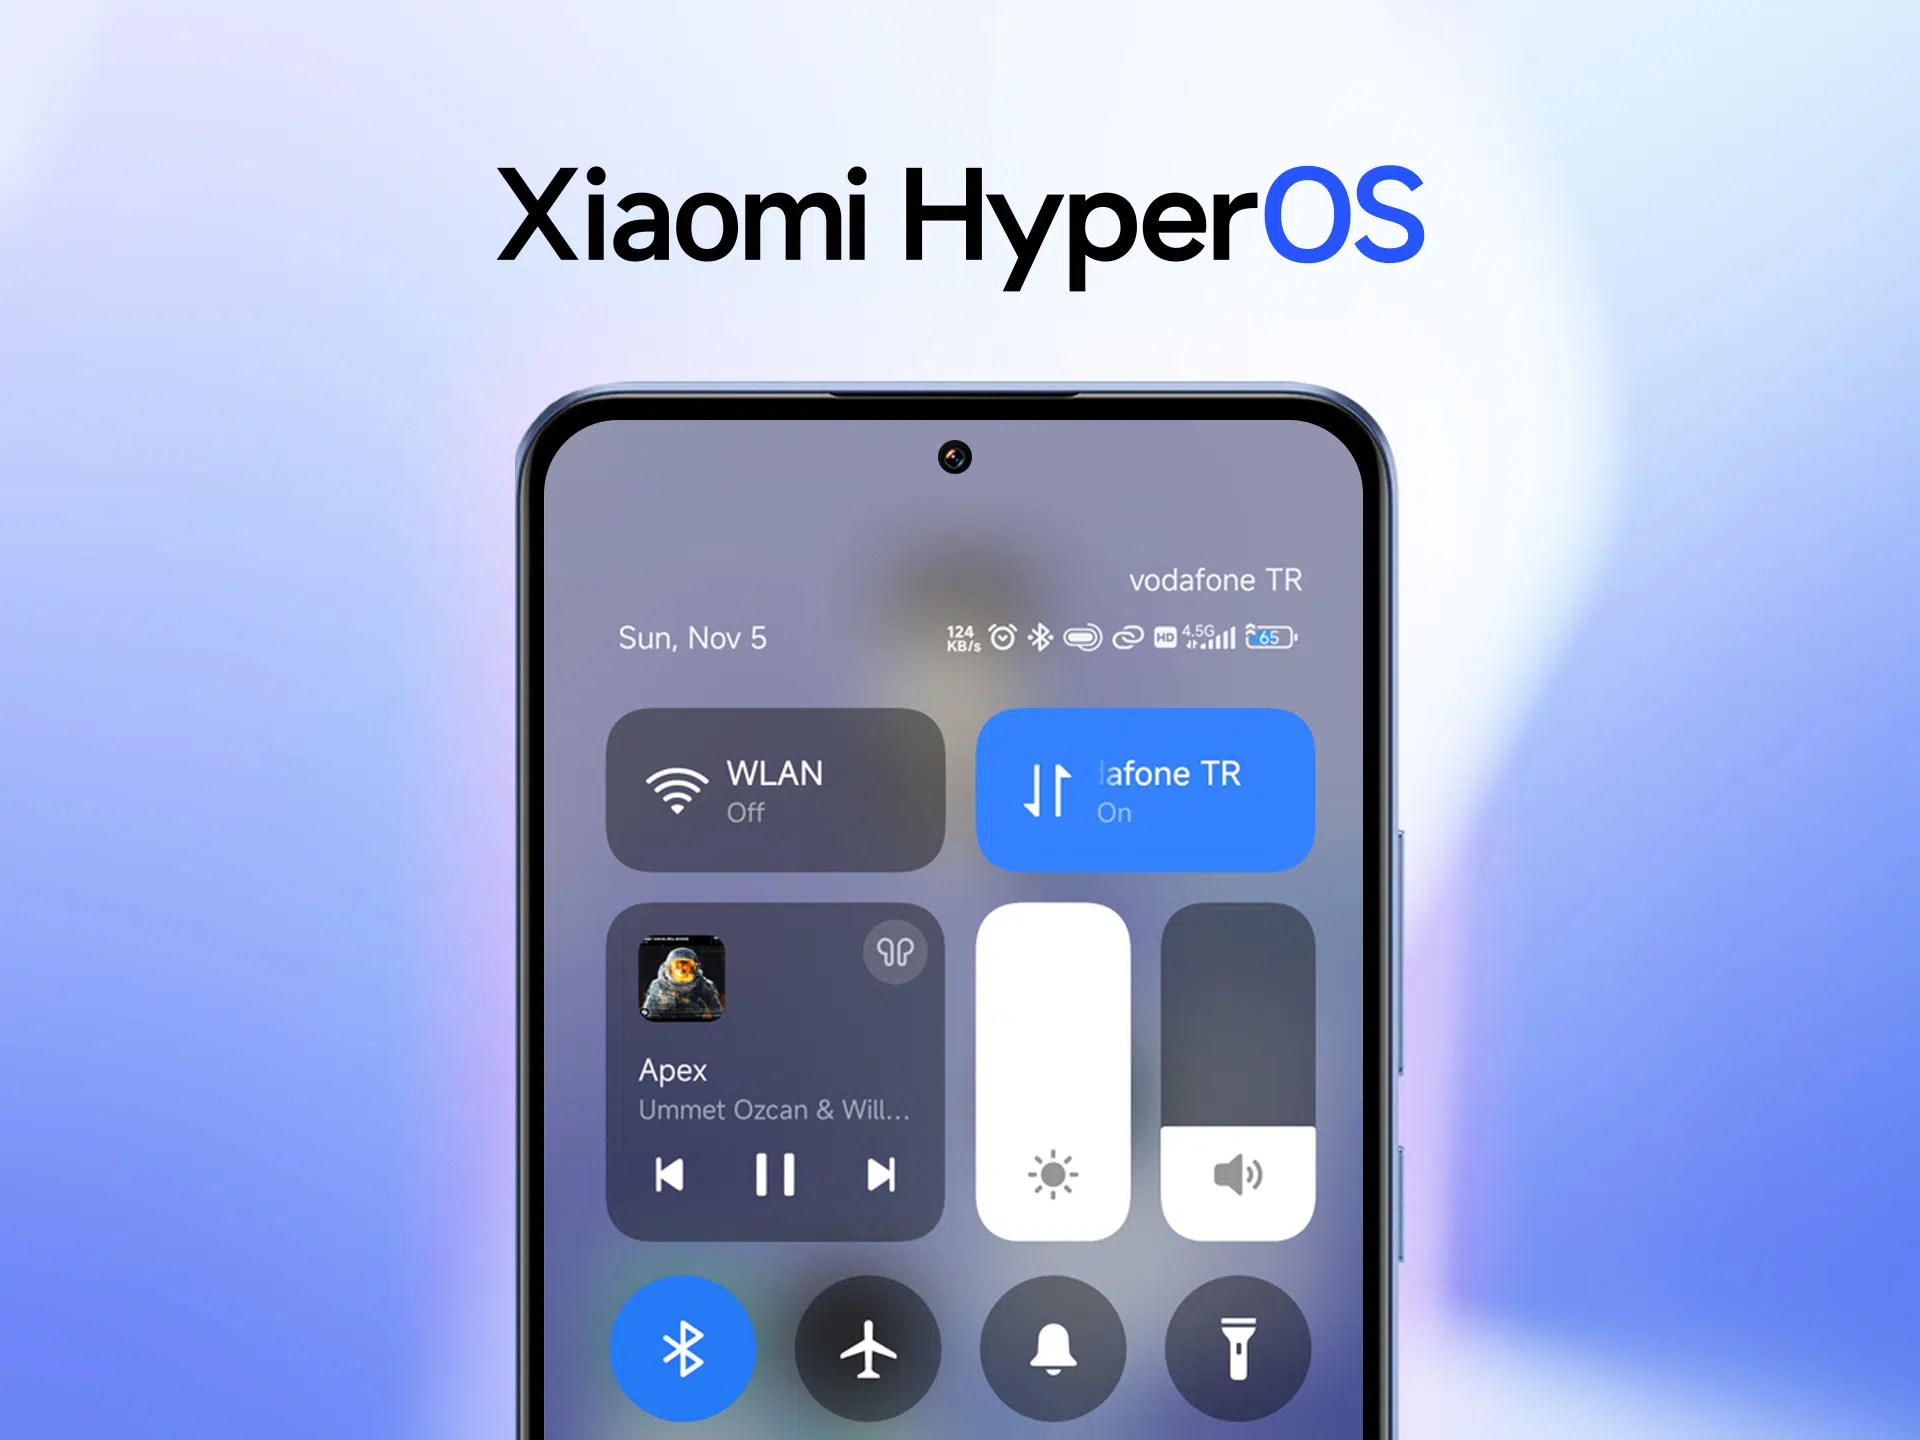 HyperOS 1.0 global rollout schedule announced. Which Xiaomi models will get the update first?